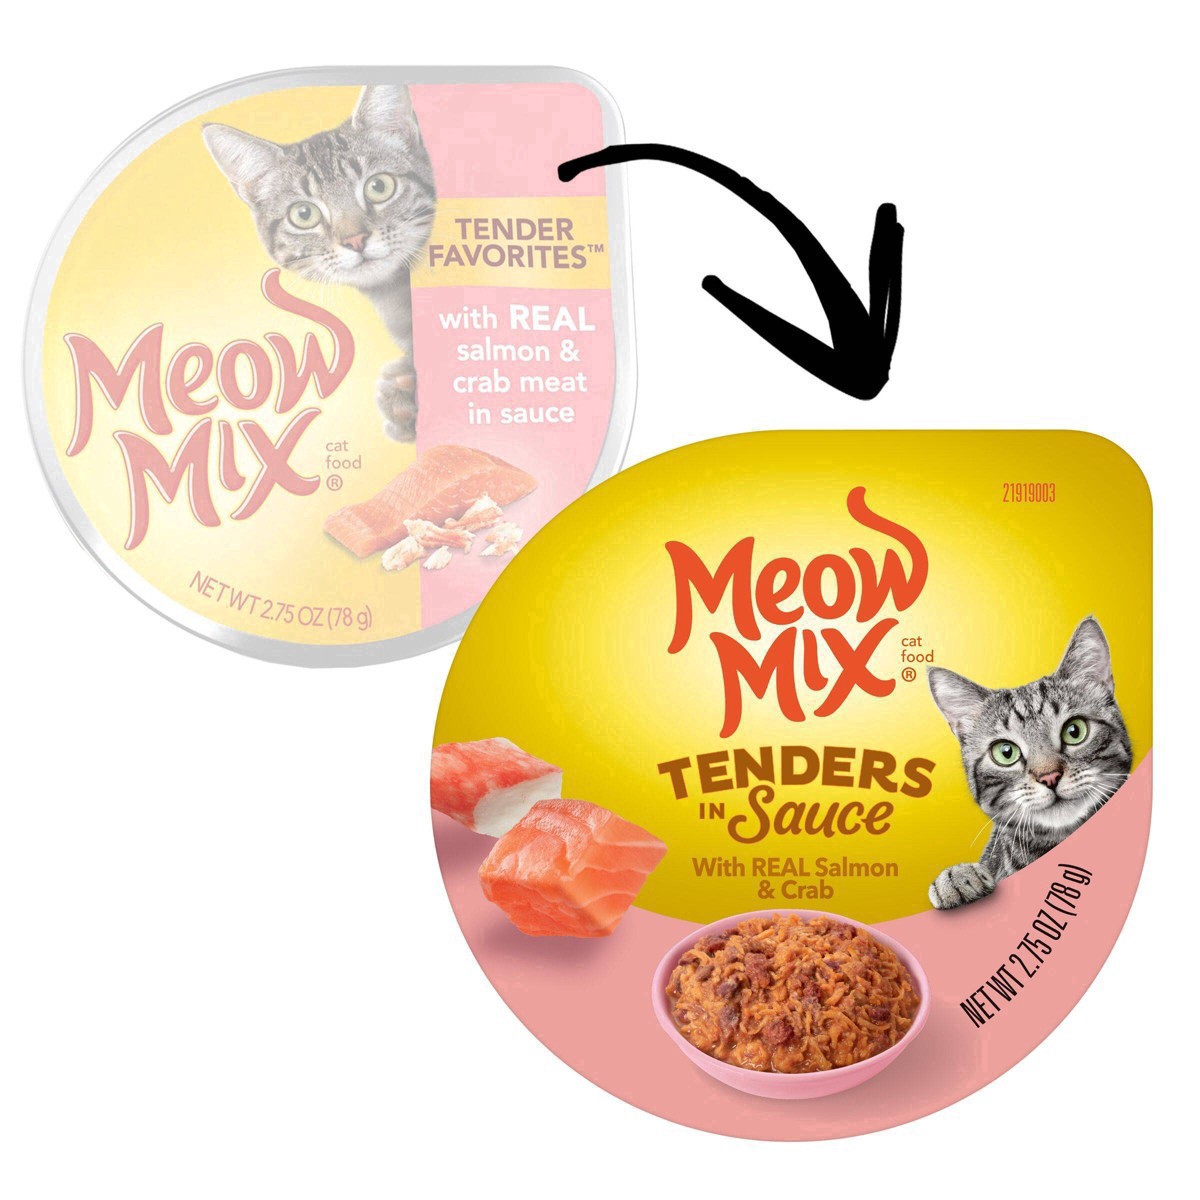 slide 5 of 64, Meow Mix Tenders in Sauce Wet Cat Food With REAL Salmon & Crab, 2.75 Oz. Cup (Packaging And Formulation Updates Underway), 2.75 oz